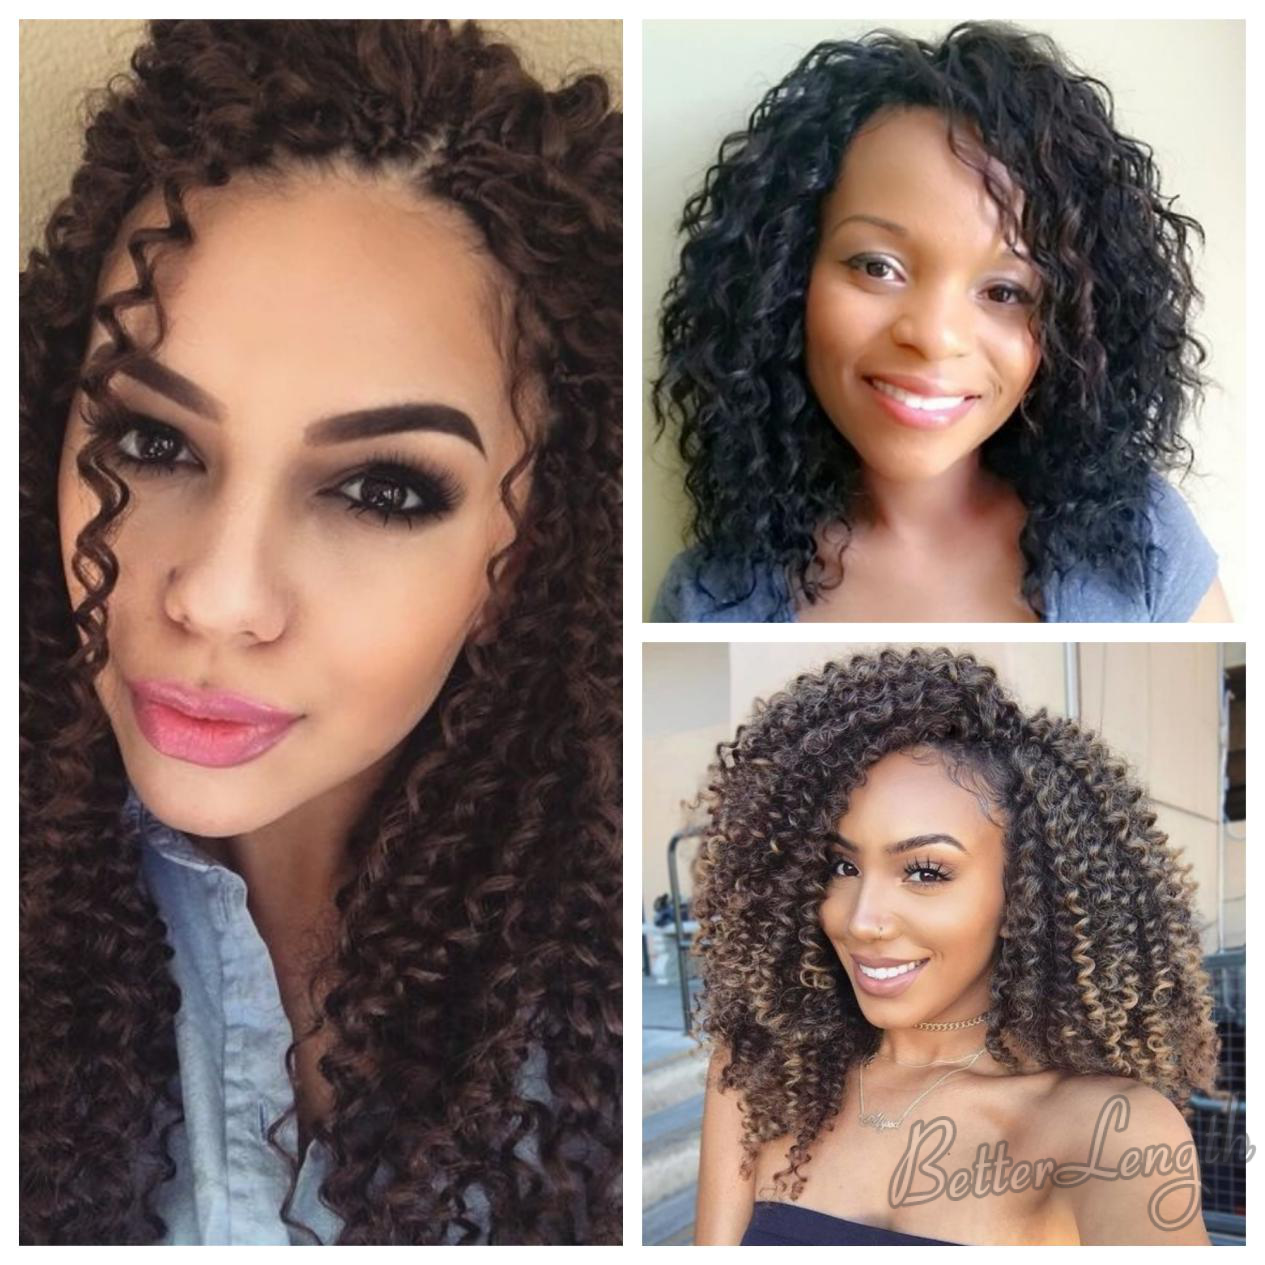 crochet braids style1 - 7 Best Protective Hairstyles That Actually Protect Natural Hair for Black Women